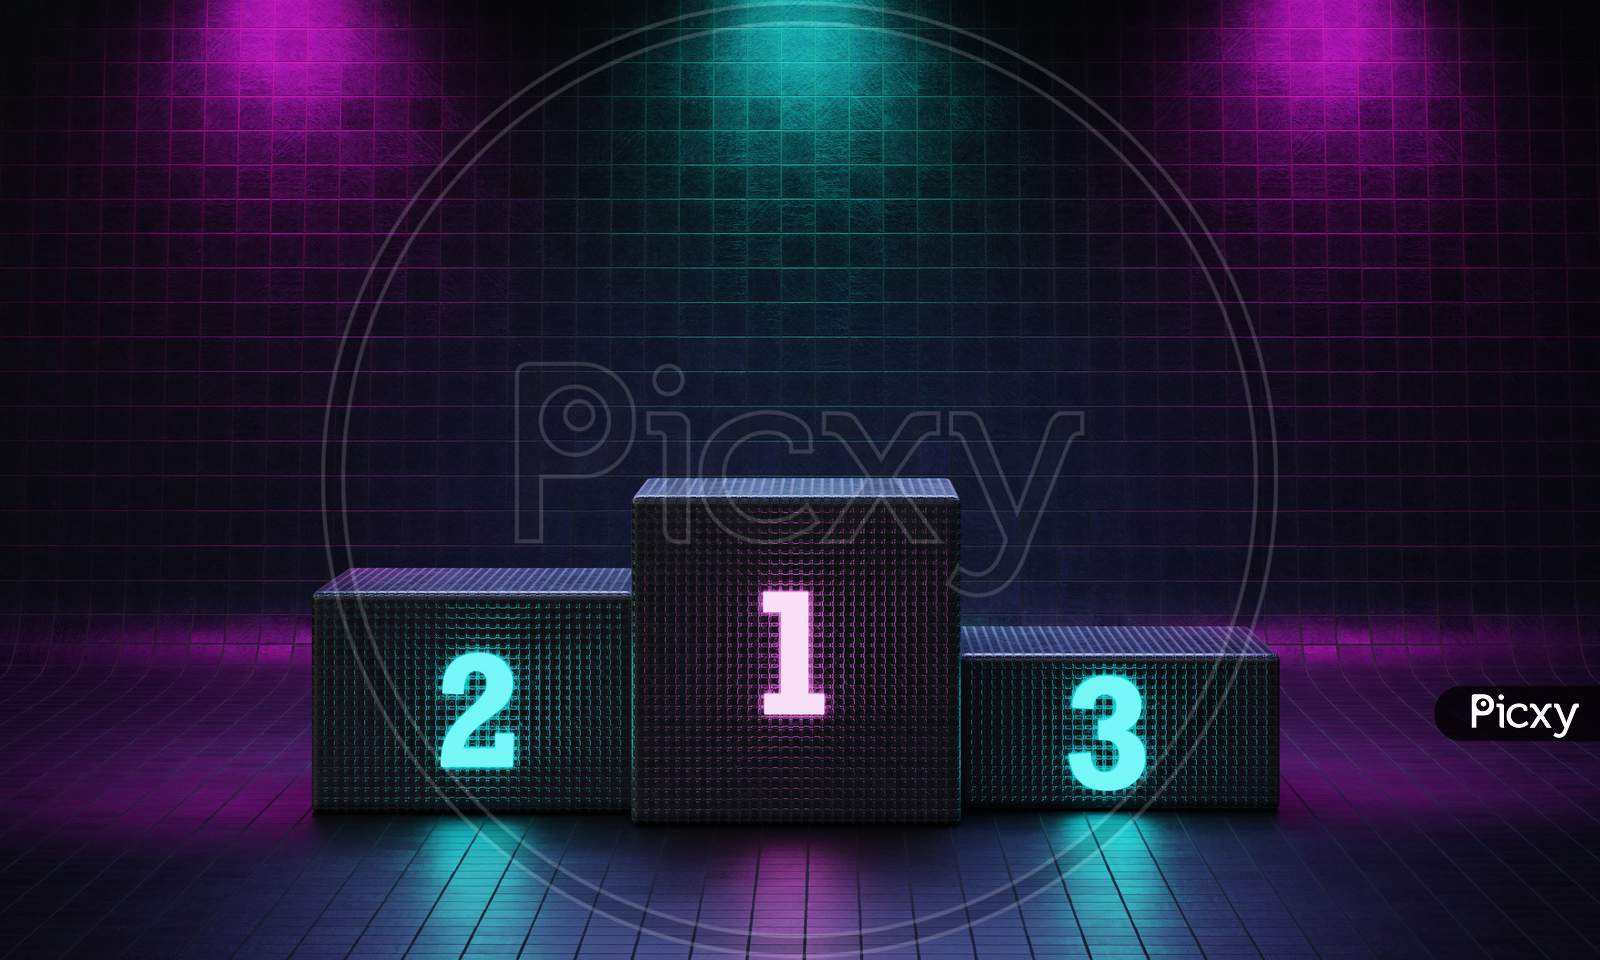 Cyberpunk Cube Winner Podium On Spotlight Background With Neon Emission Number Place. Futuristic Scene Style Concept. Studio Platform. Exhibition And Presentation Stage. 3D Illustration Render Graphic